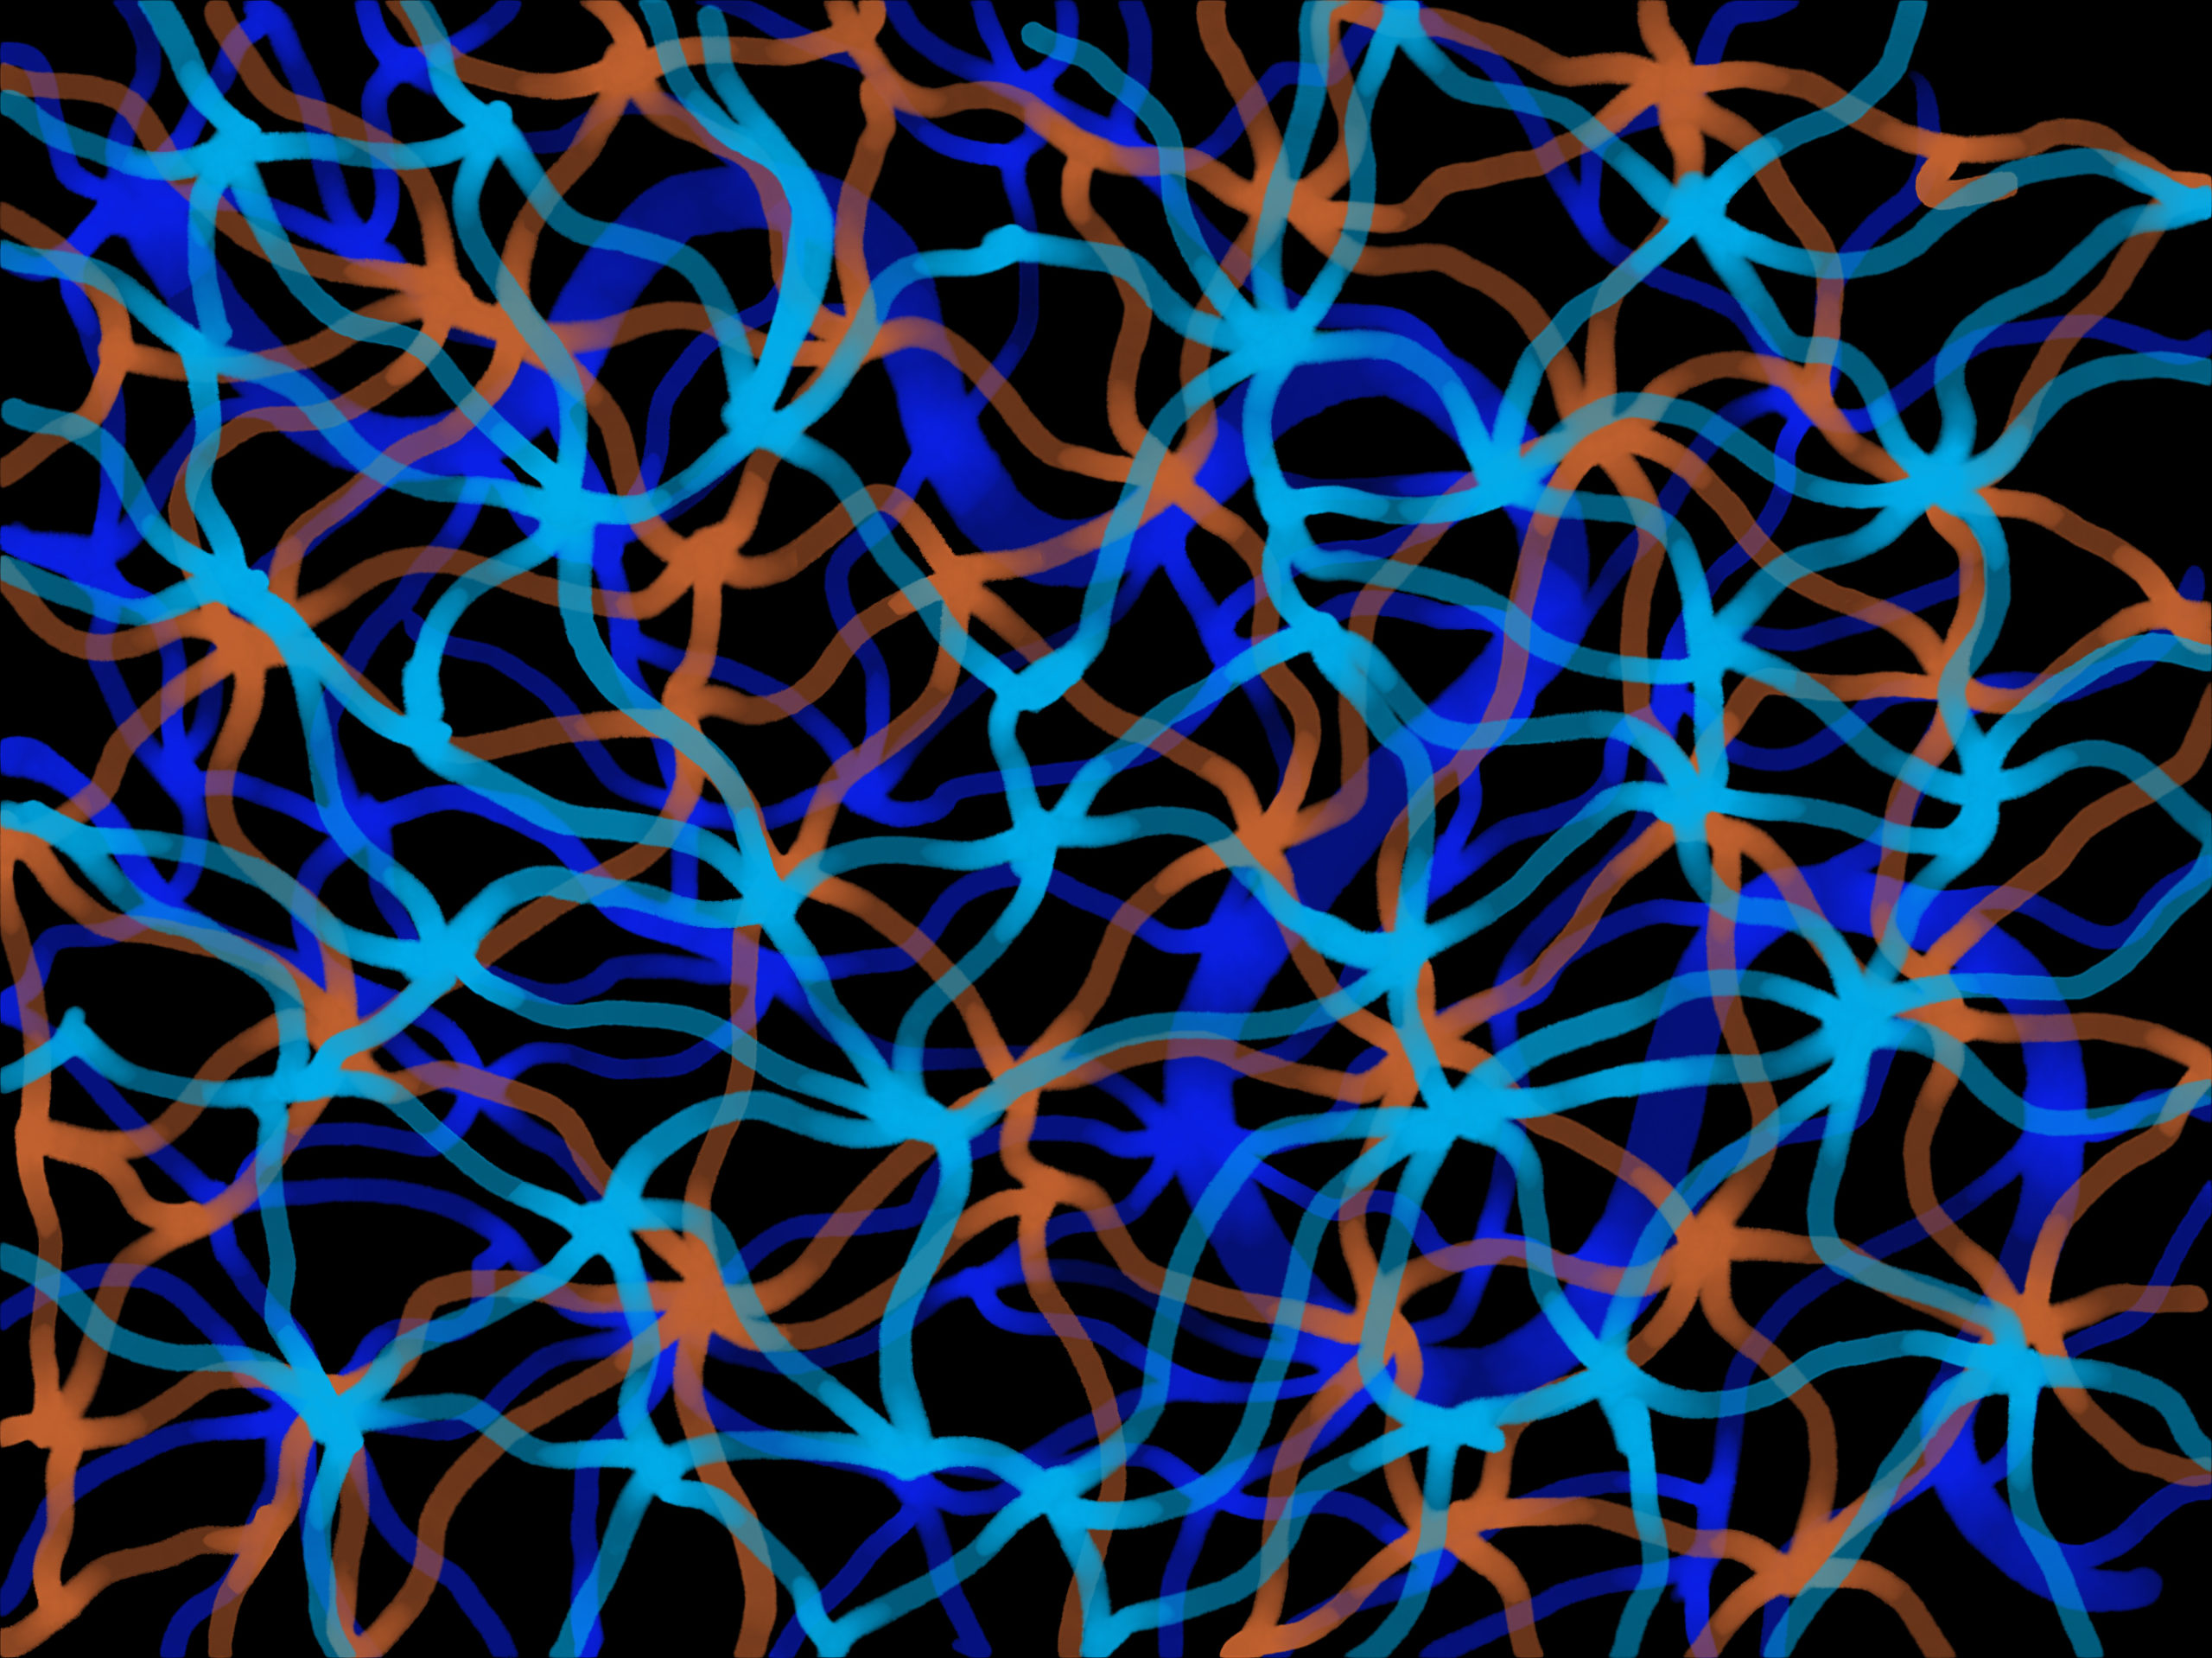 'Tangled Paths' shows blue, orange and black pathways tangled and intersecting in a digital piece created by Muruwori and Gumbaynnggirr Co-Design Lead Researcher Mr Phillip Orcher.